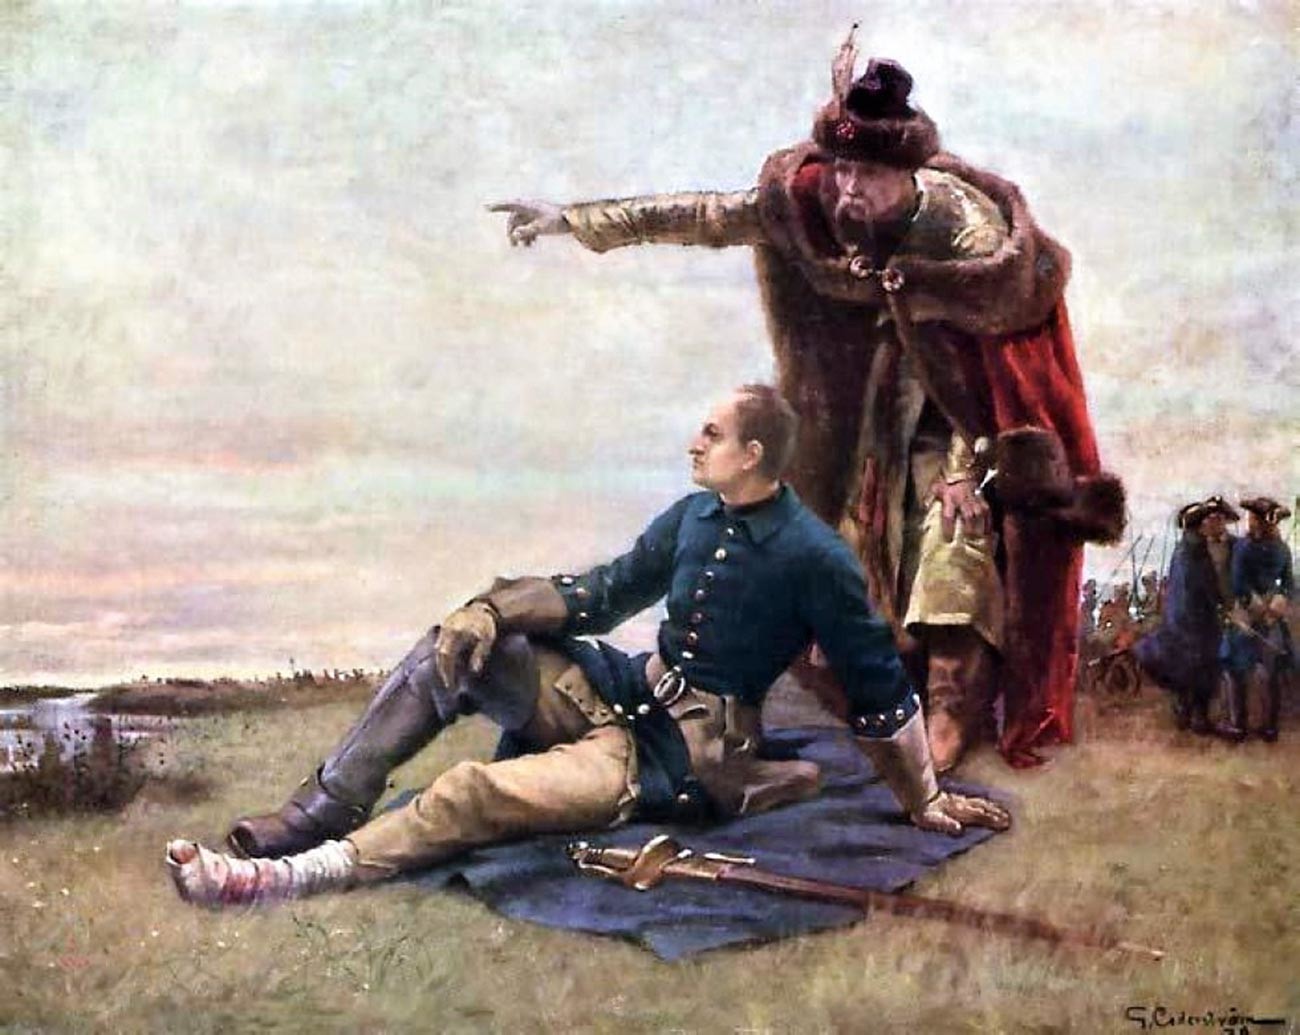 Charles XII and Ivan Mazepa after the Poltava Battle.